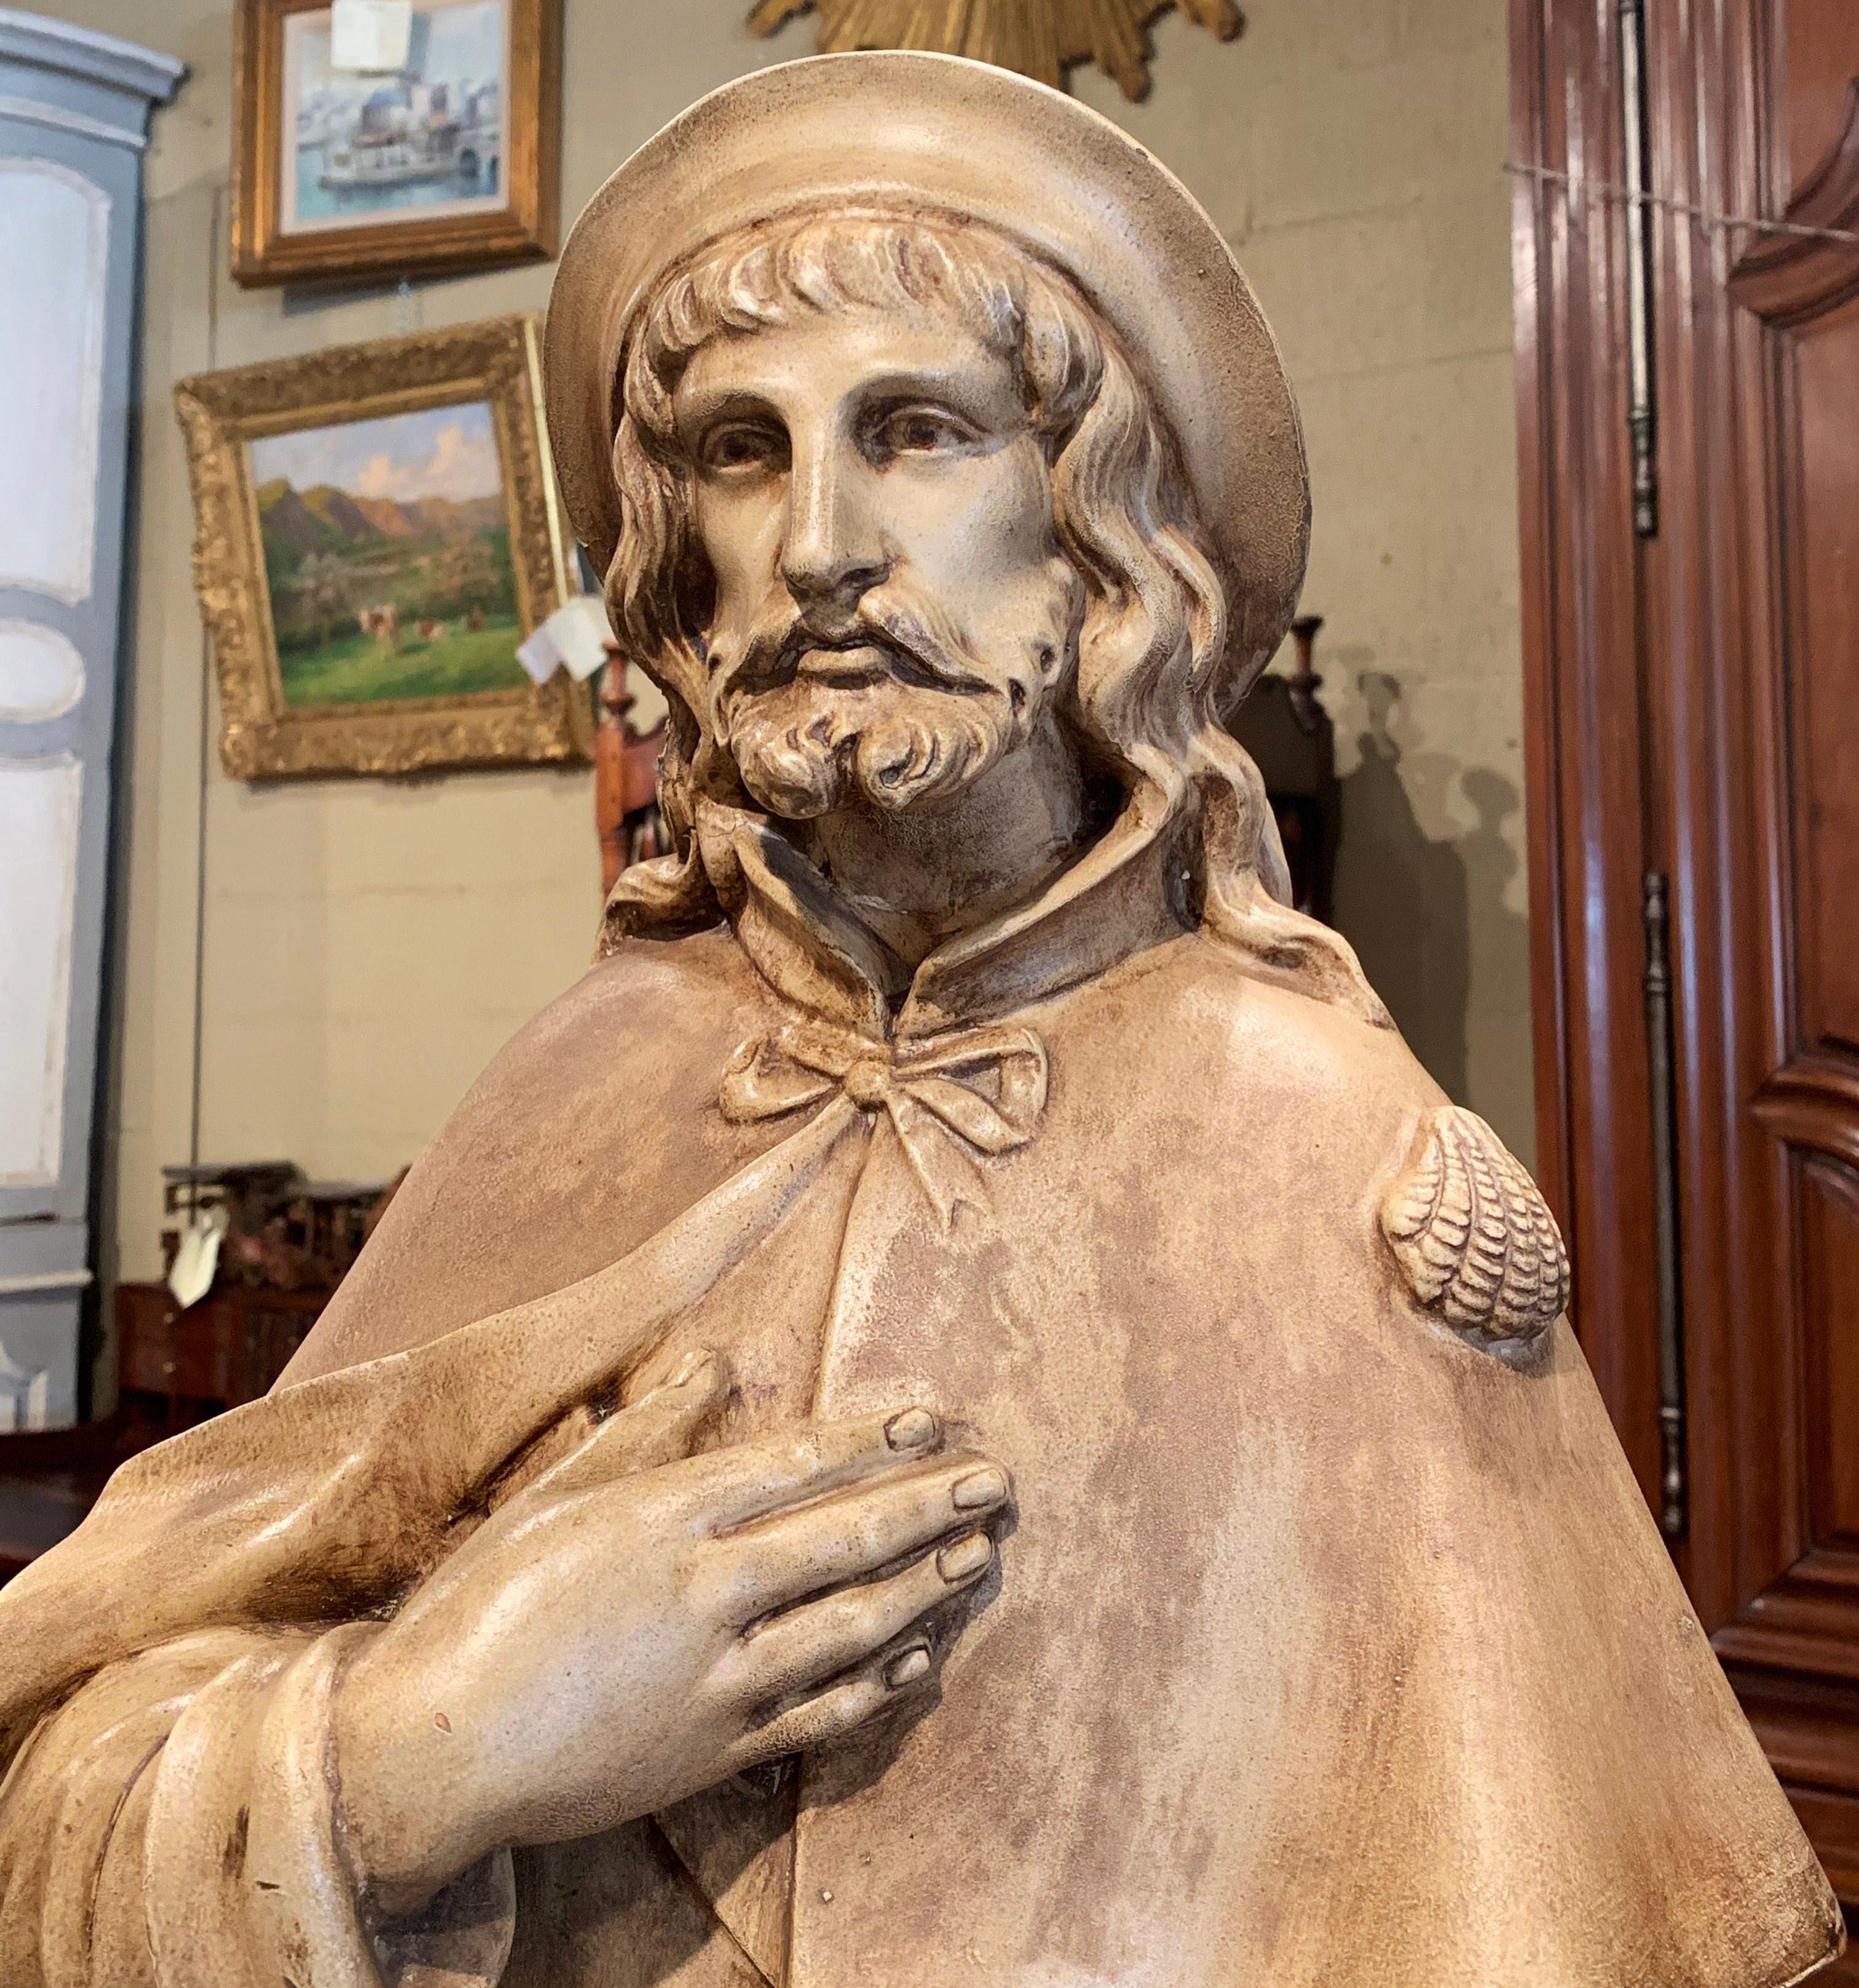 This fine terracotta sculpture was crafted in France, circa 1870. The tall statue depicts Saint Roch or Rocco, a Catholic man who was saved by a dog after he contracted the Plague. The sculpture is in very good condition with exquisite details and a